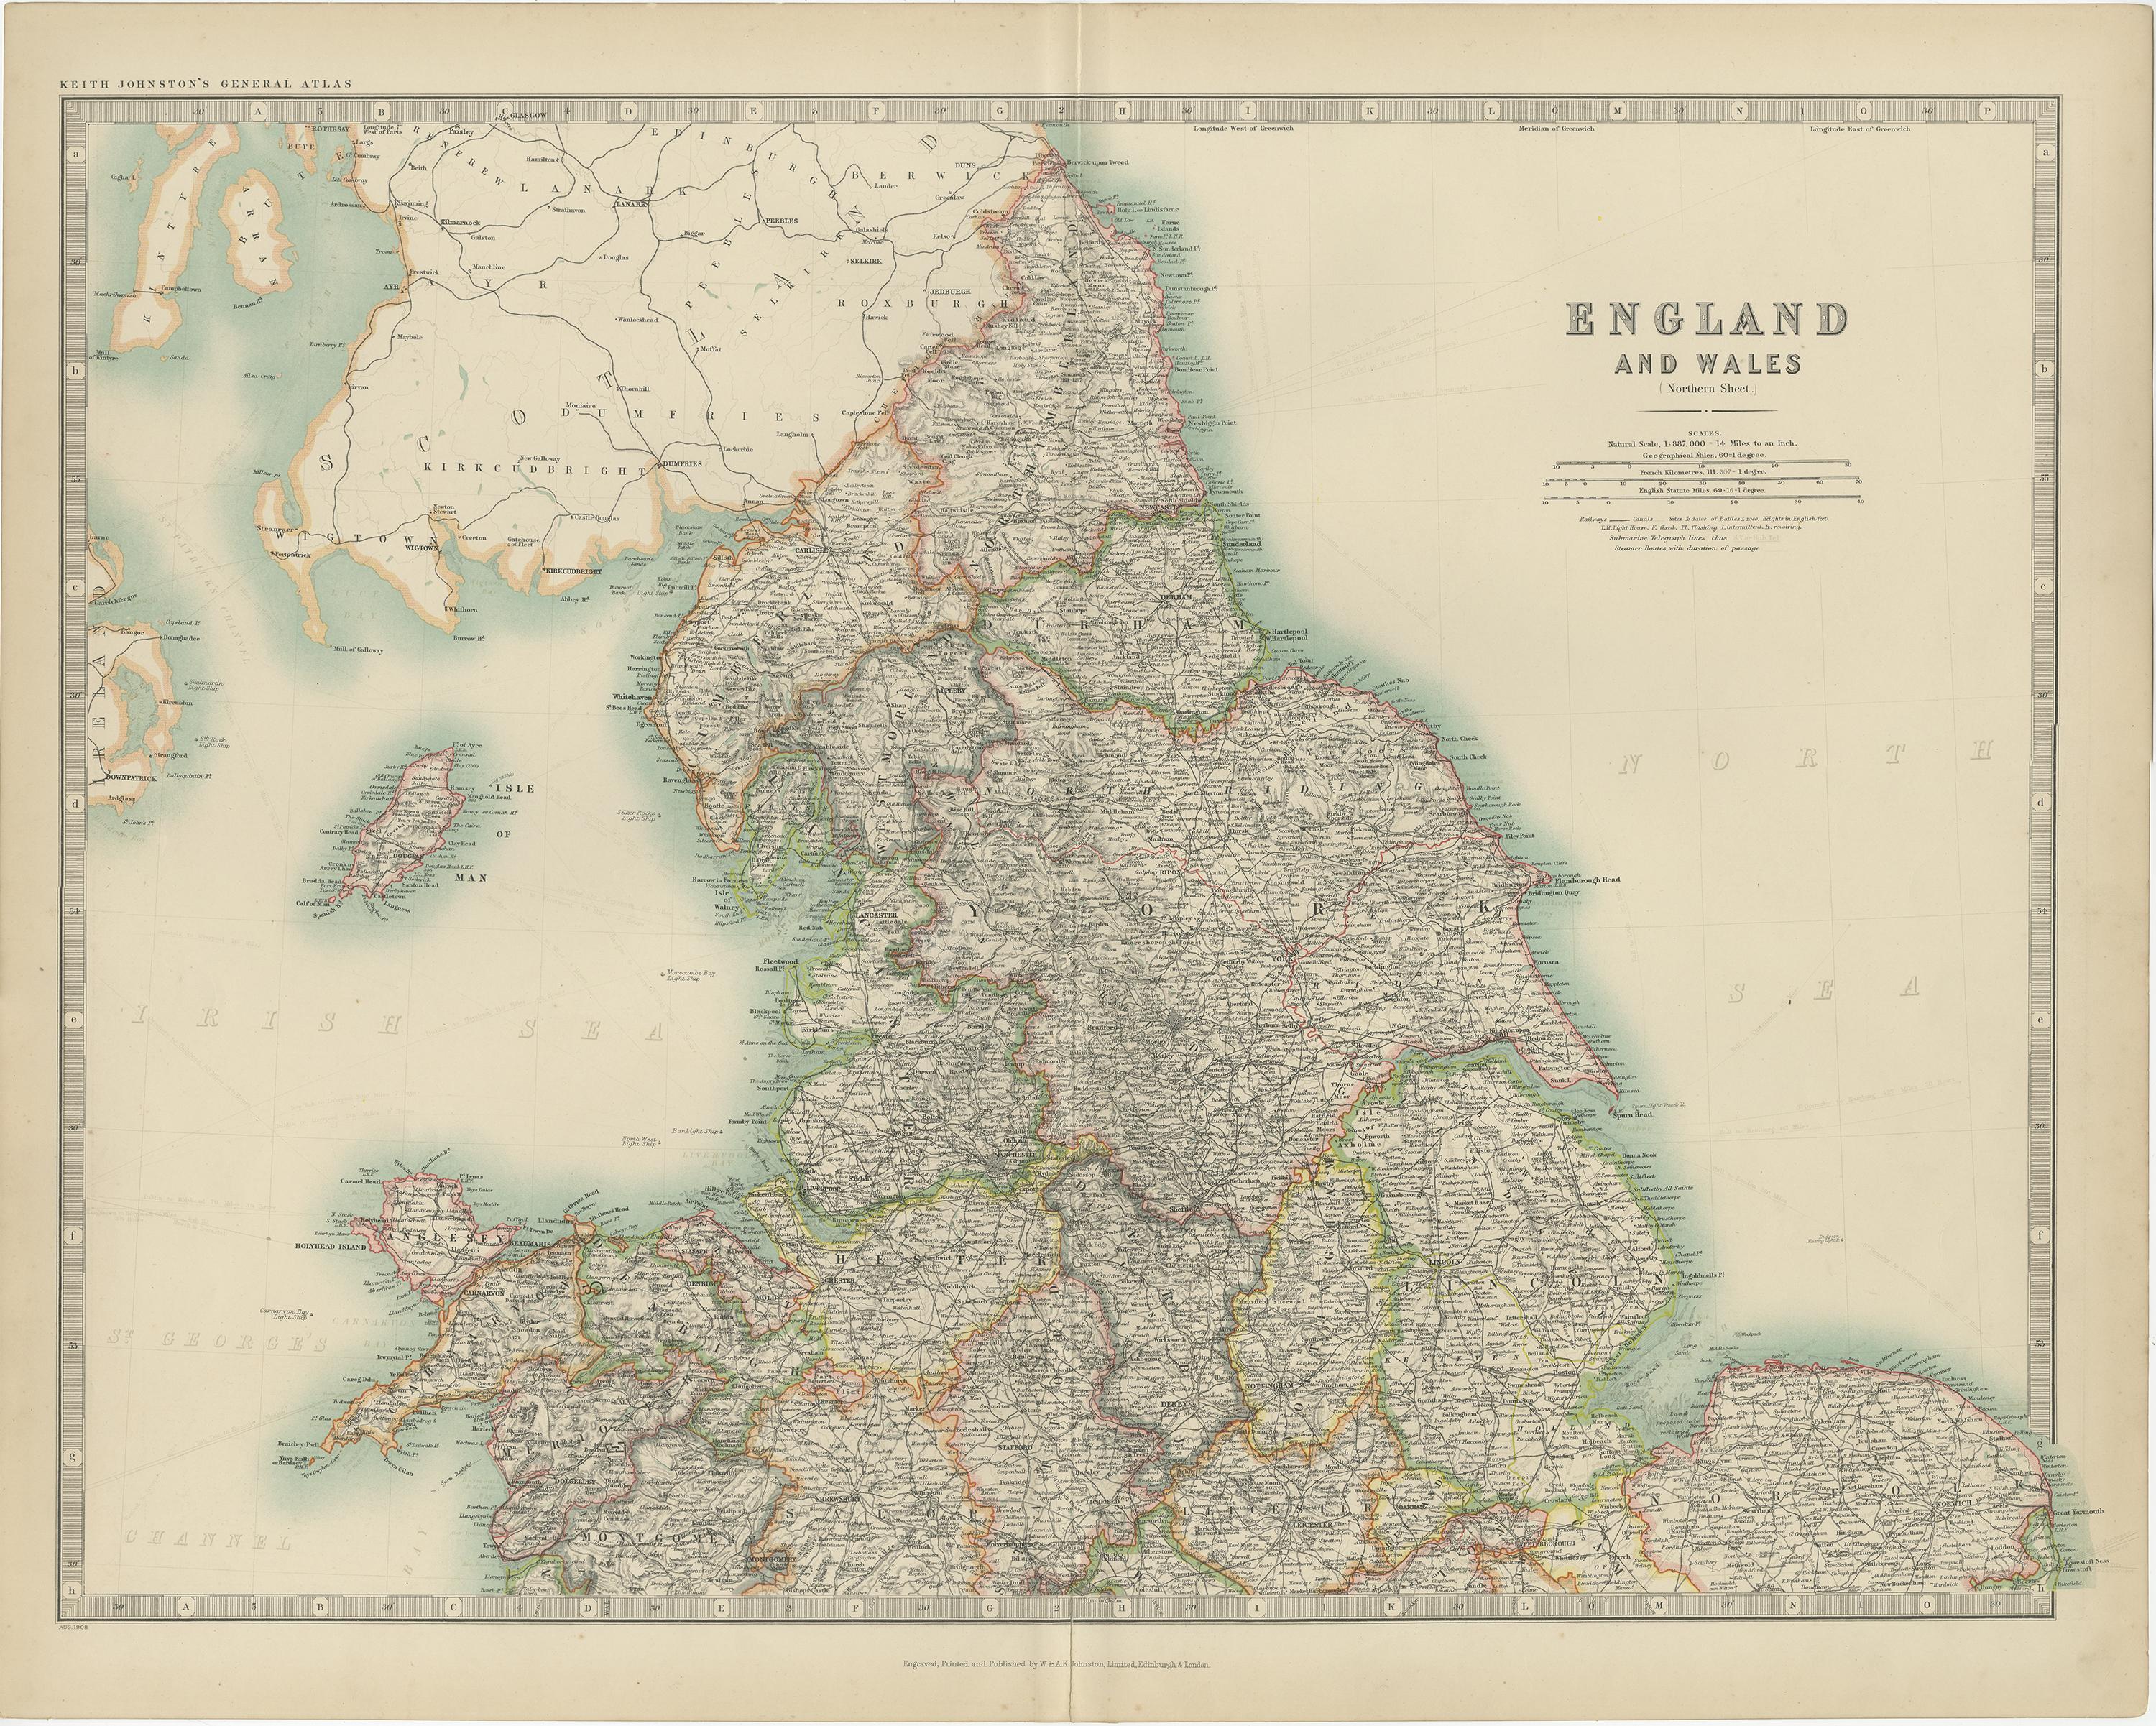 The antique map titled 'England and Wales' is a historical cartographic representation of these two nations. This original antique map of England and Wales is sourced from the 'Royal Atlas of Modern Geography,' which was published by W. & A.K.